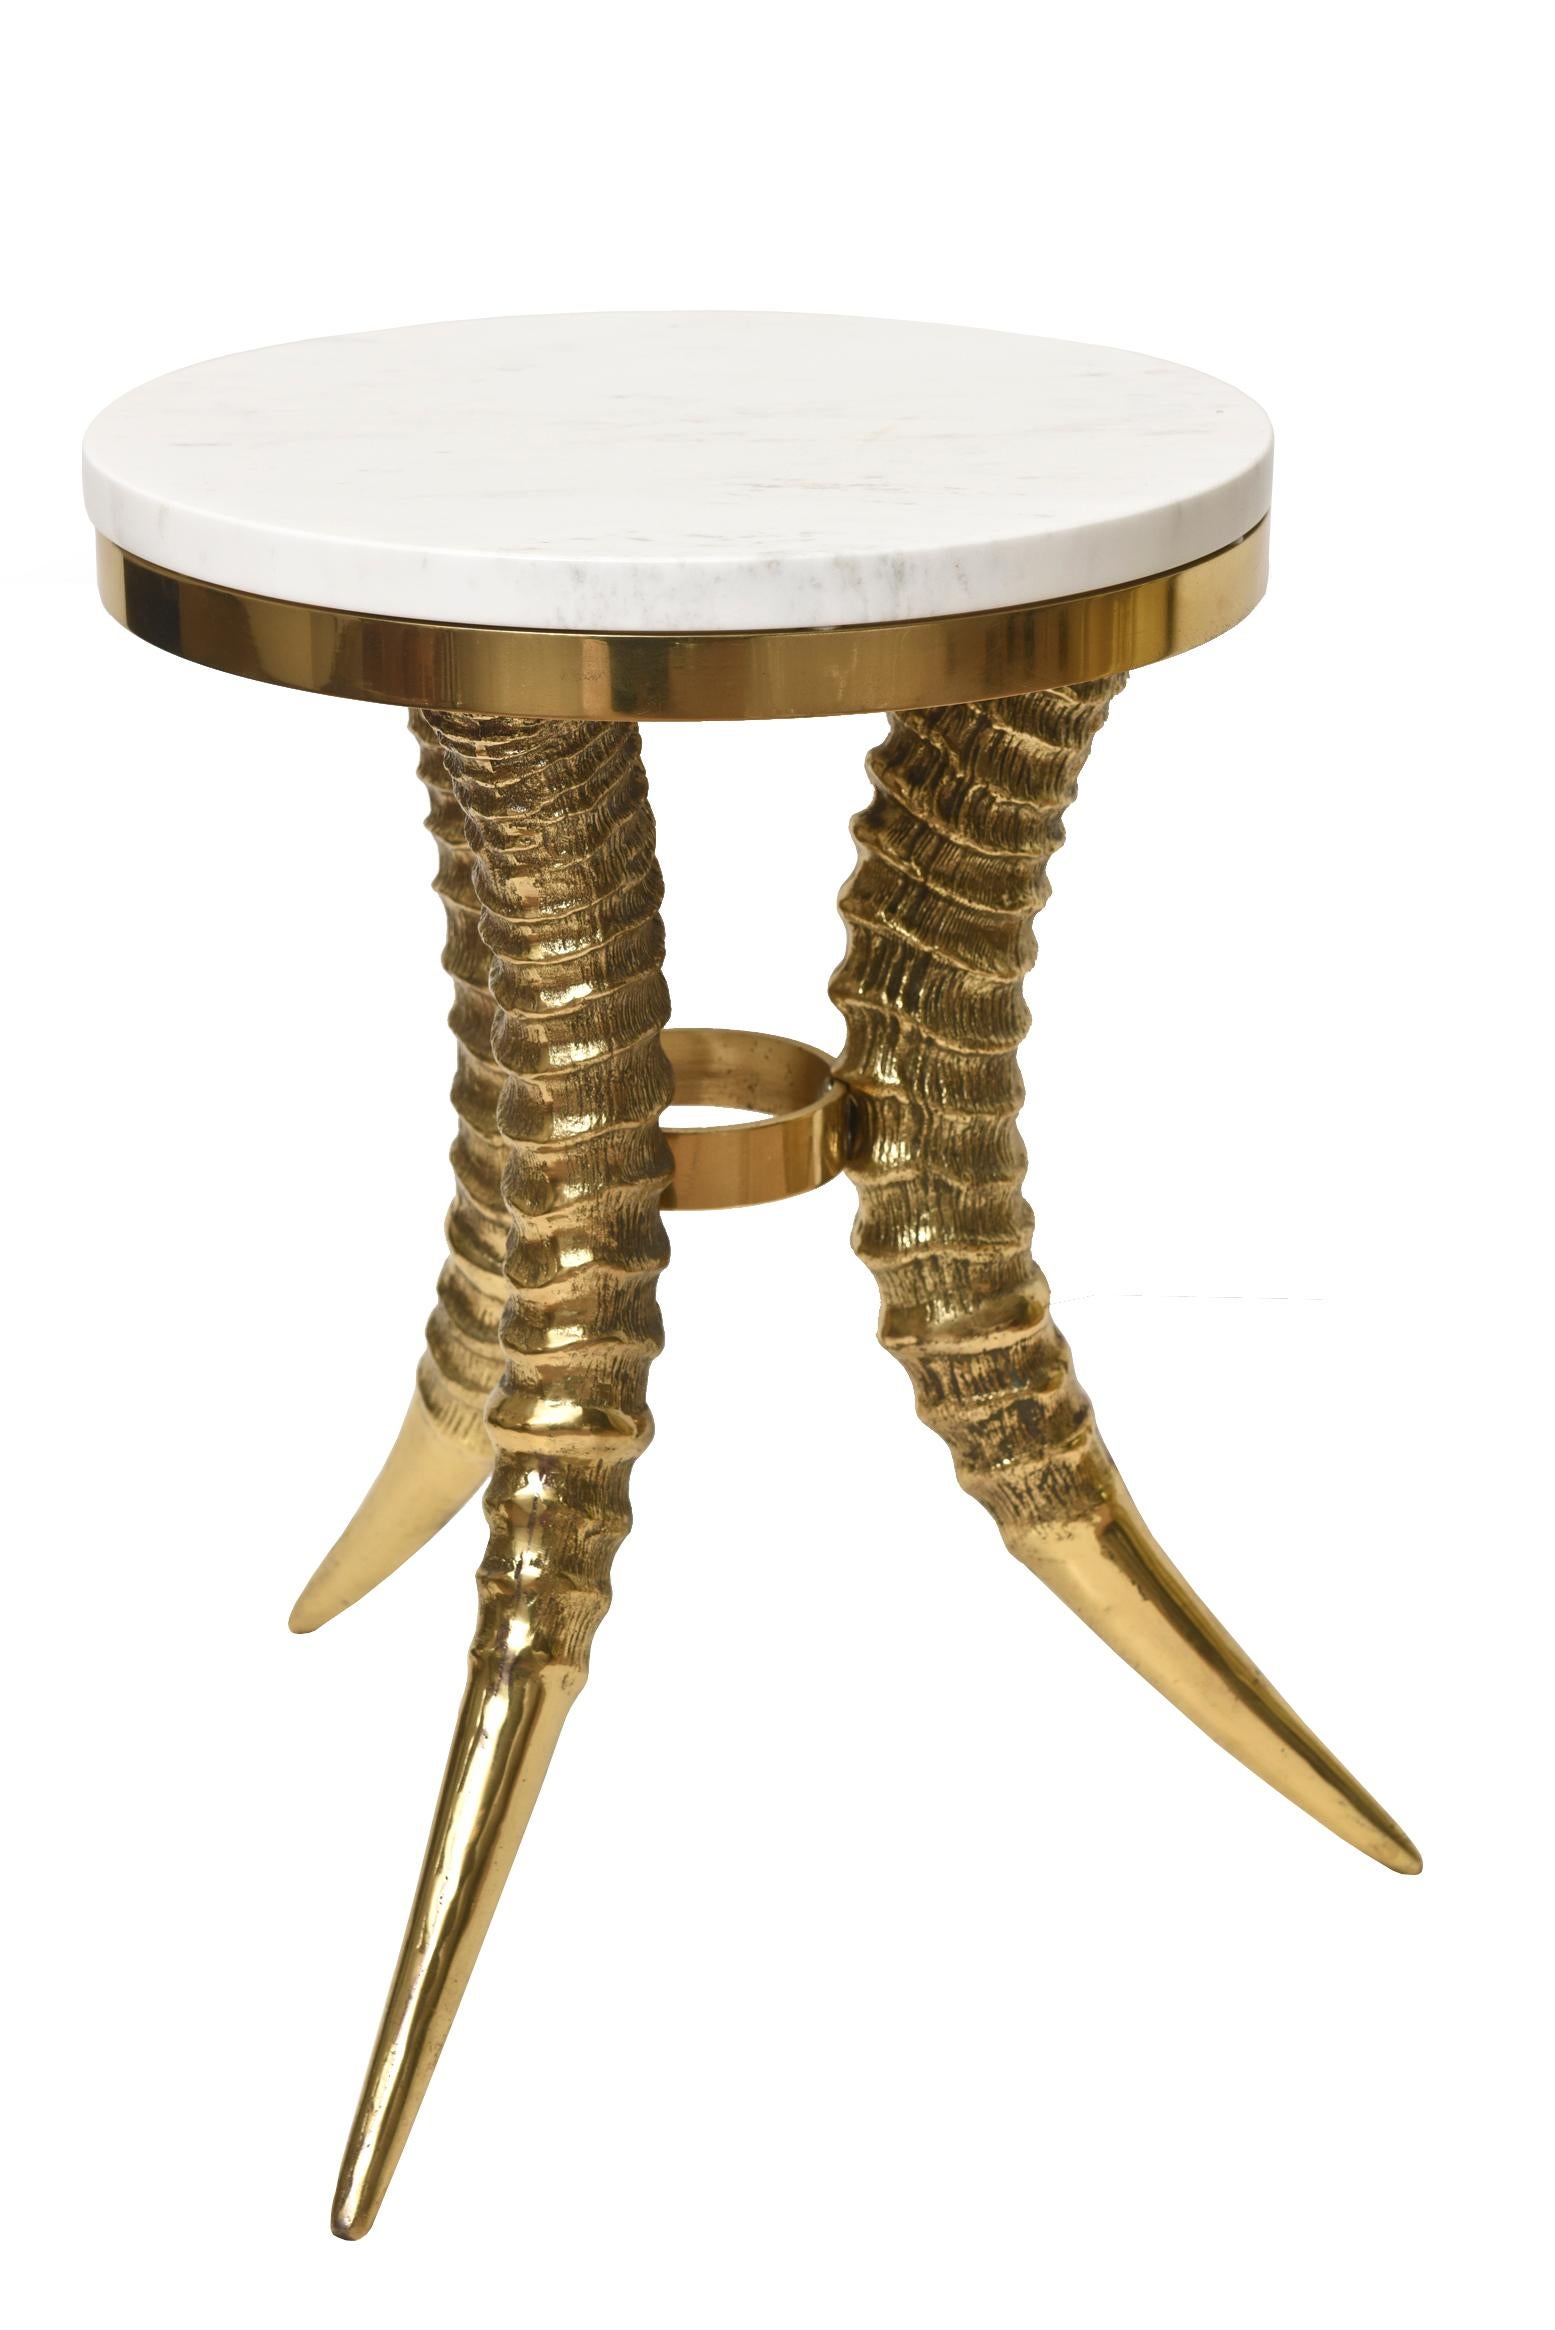 This fantastic vintage and solid brass horn side or drink table with a marble top is tres chic! The marble top was replaced and is called Volakas marble from Greece. It has beautiful veining of gray and champagne with white. It is sculptural and